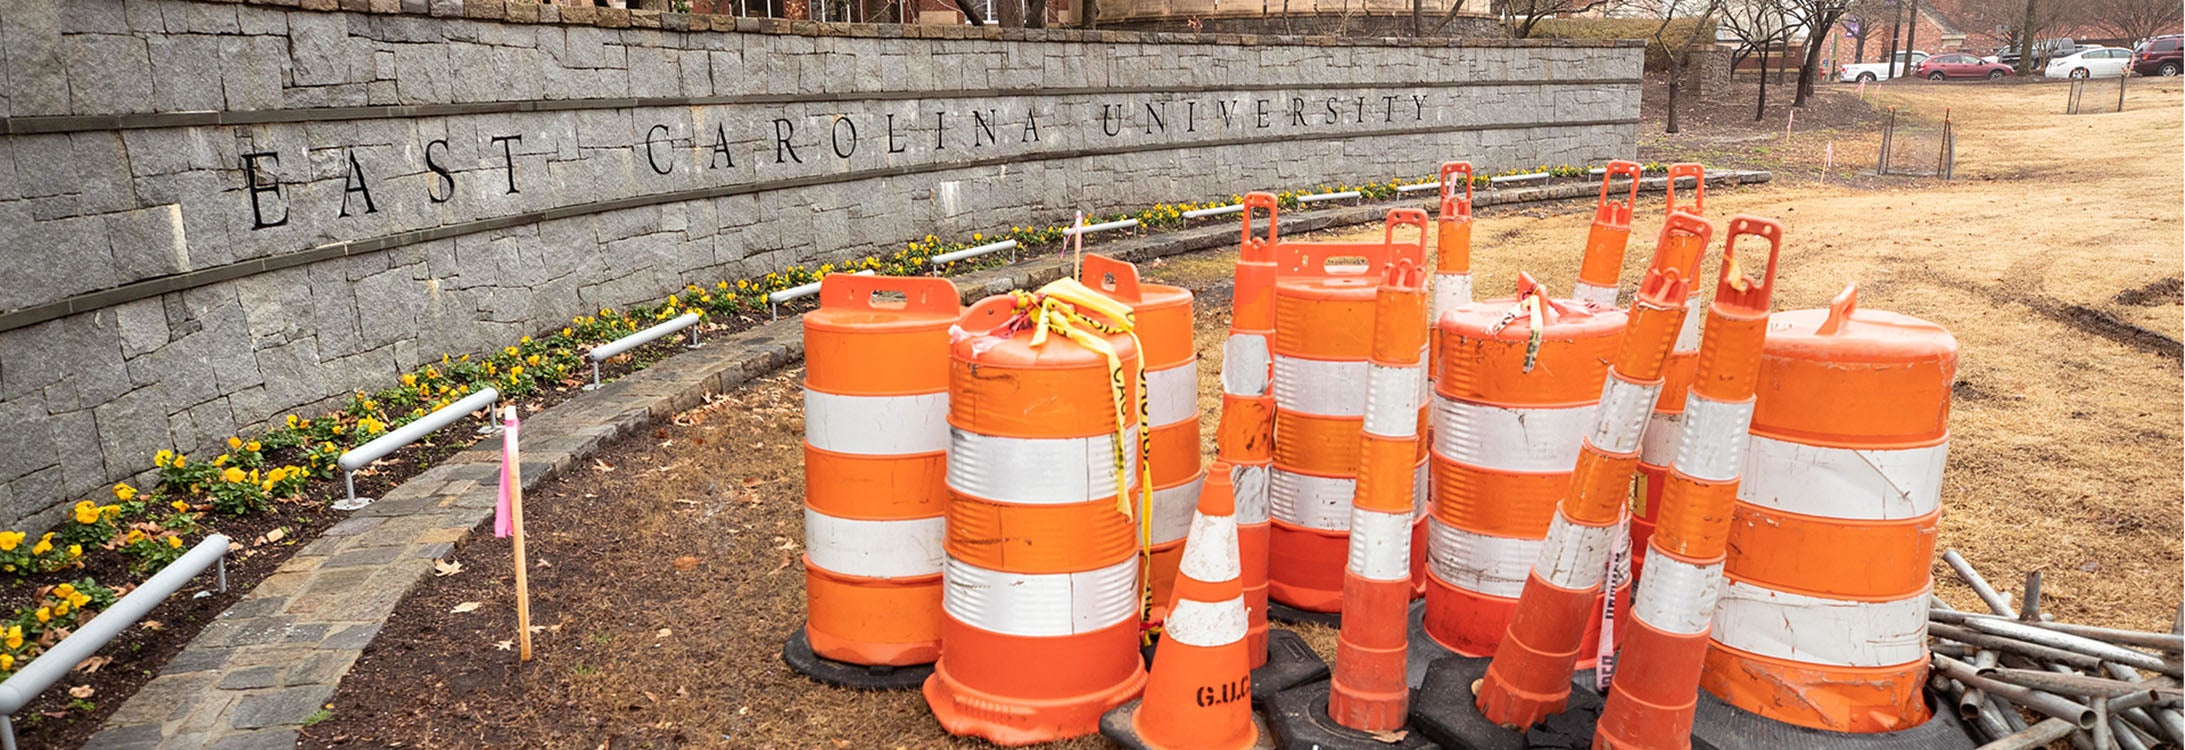 The stone East Carolina University sign at the corner of 5th Street and Reade Circle will not be accessible during construction of the City of Greenville’s Town Creek Culvert Project. The sign is a popular location for photos on campus.